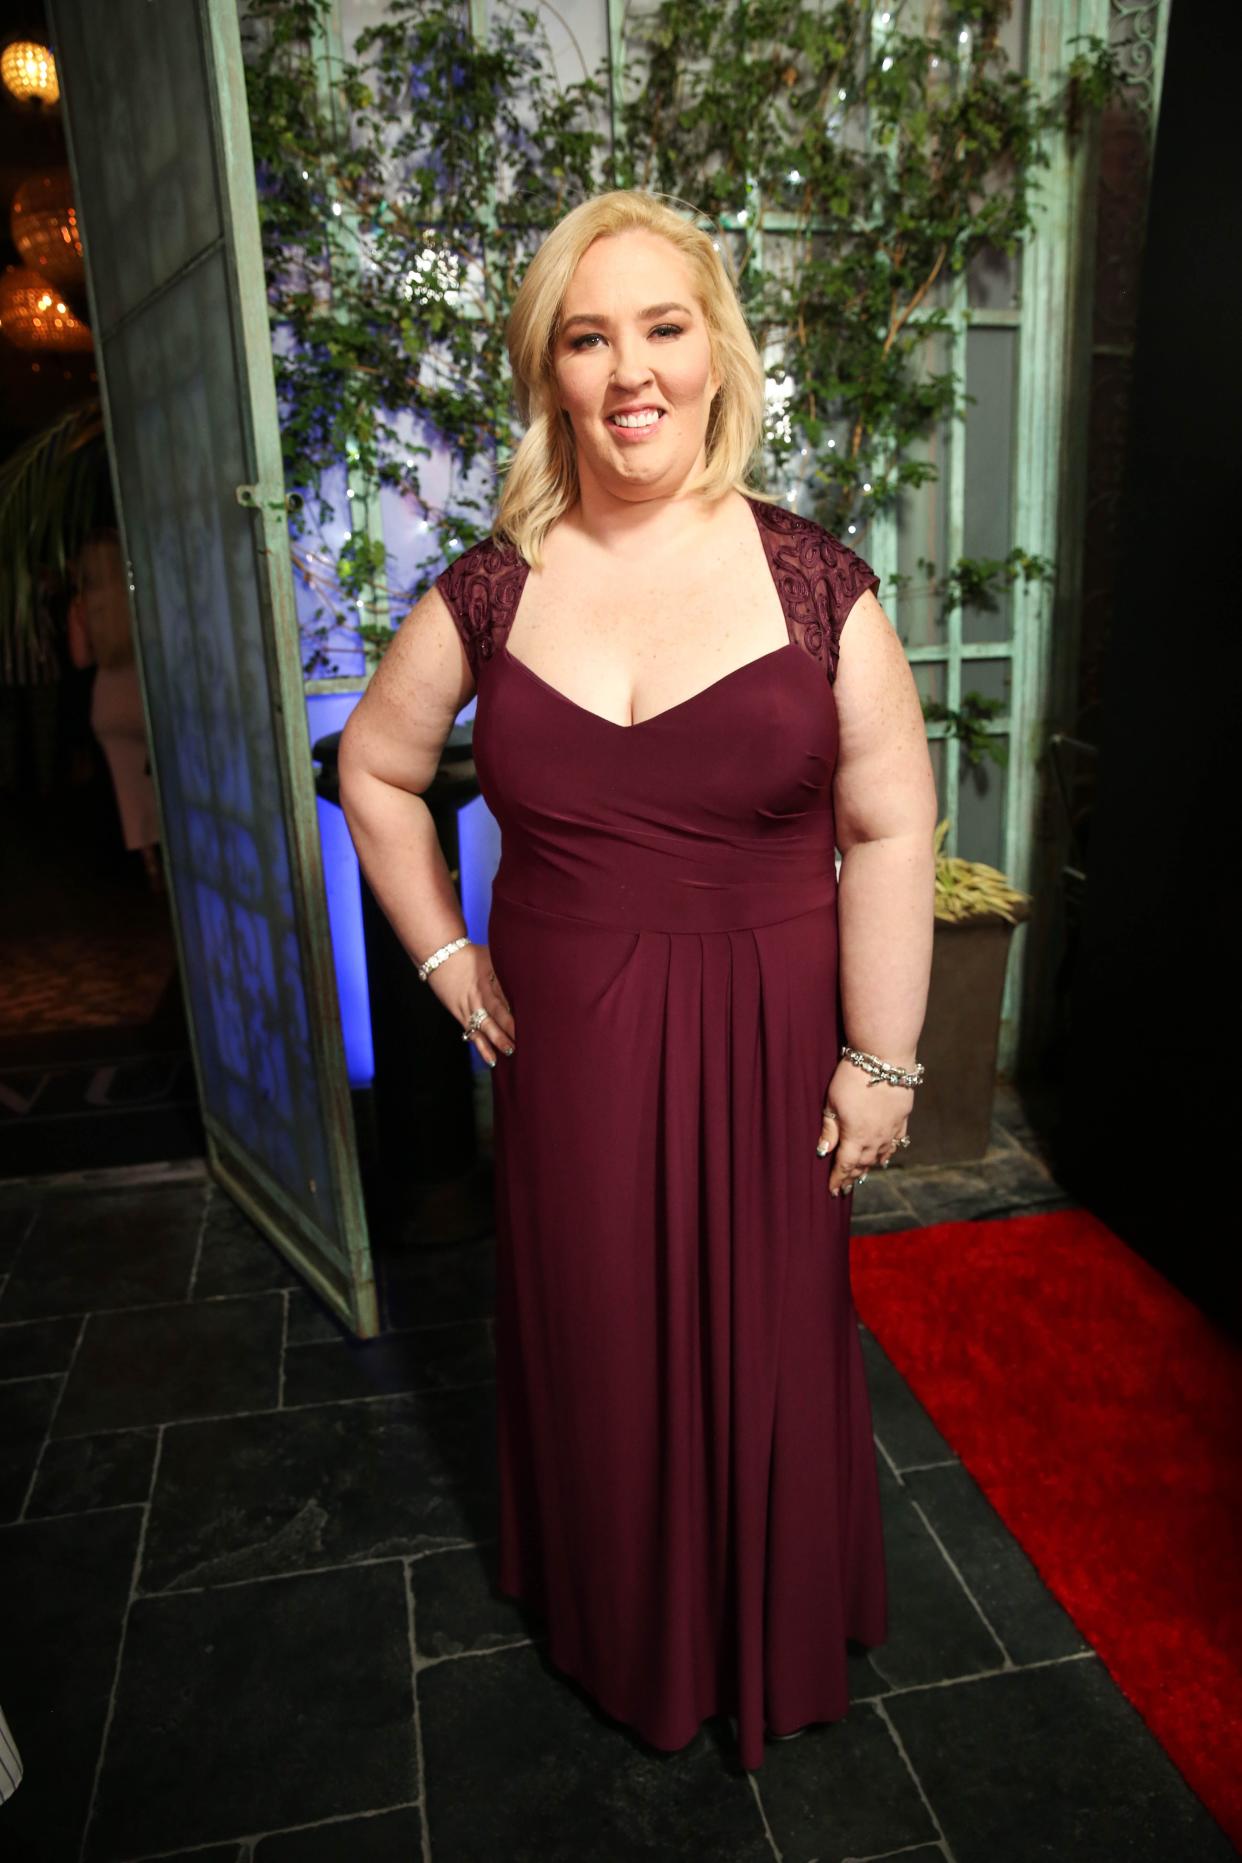 Mama June Shannon poses with her hand on her hip wearing a red gown